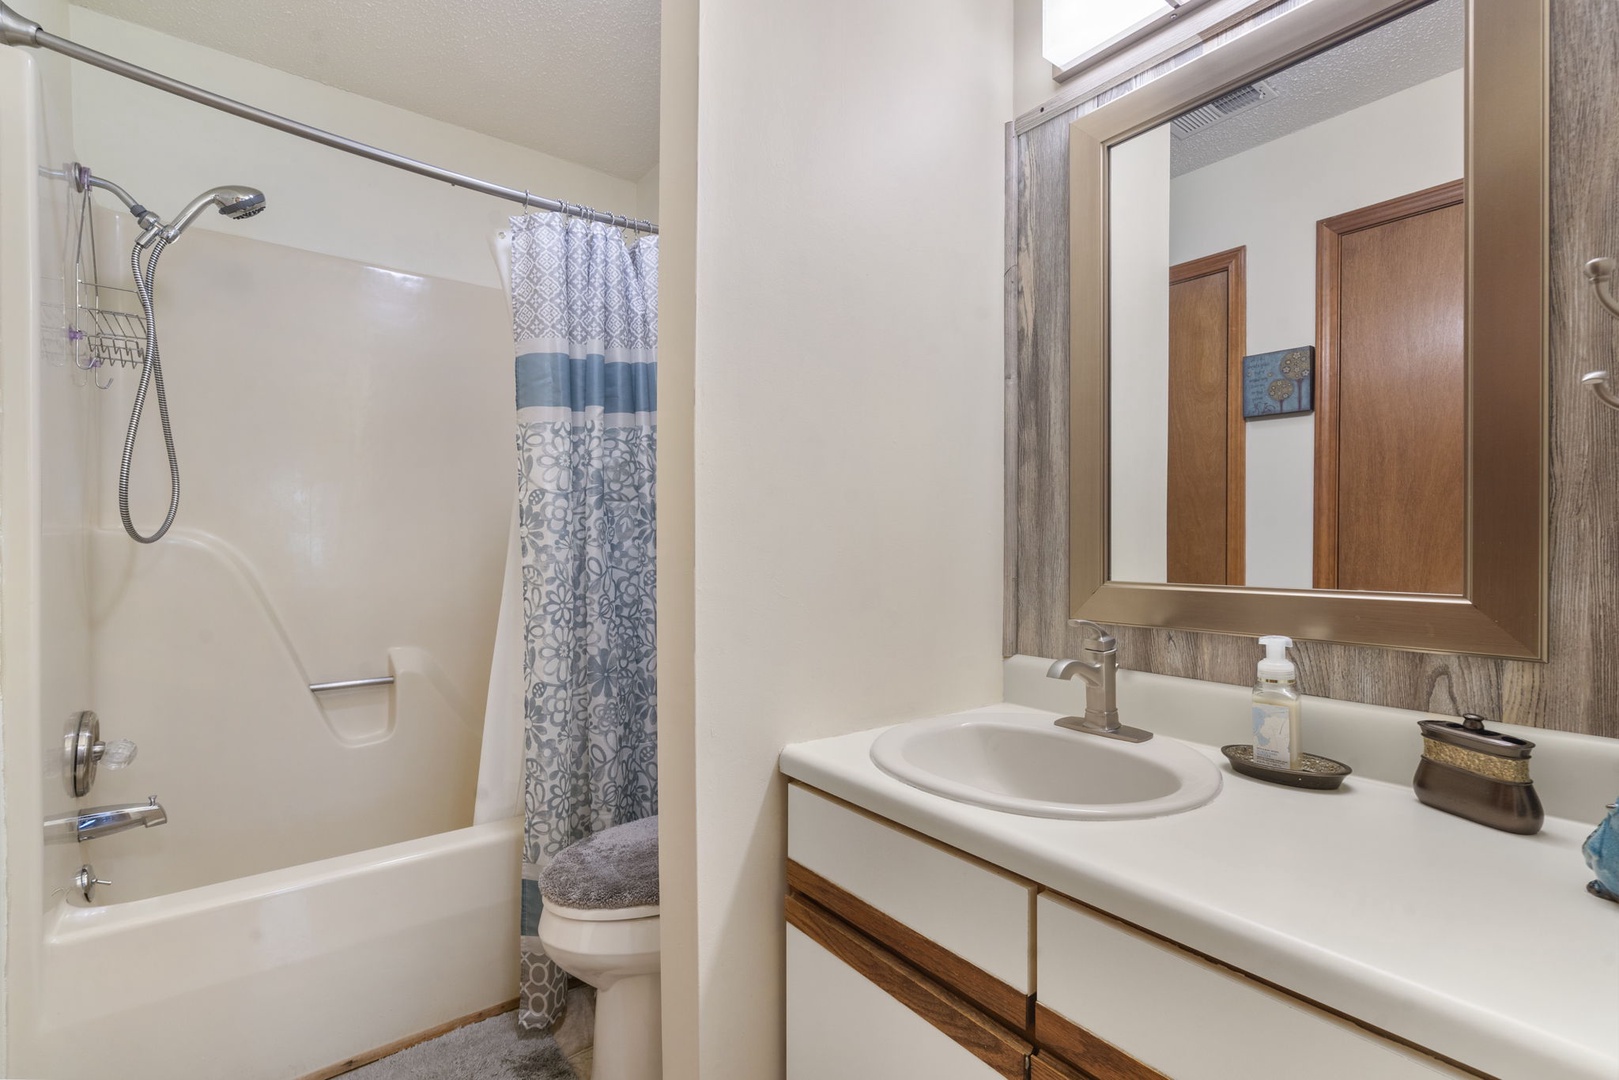 The king en suite offers an oversized single vanity & shower/tub combo